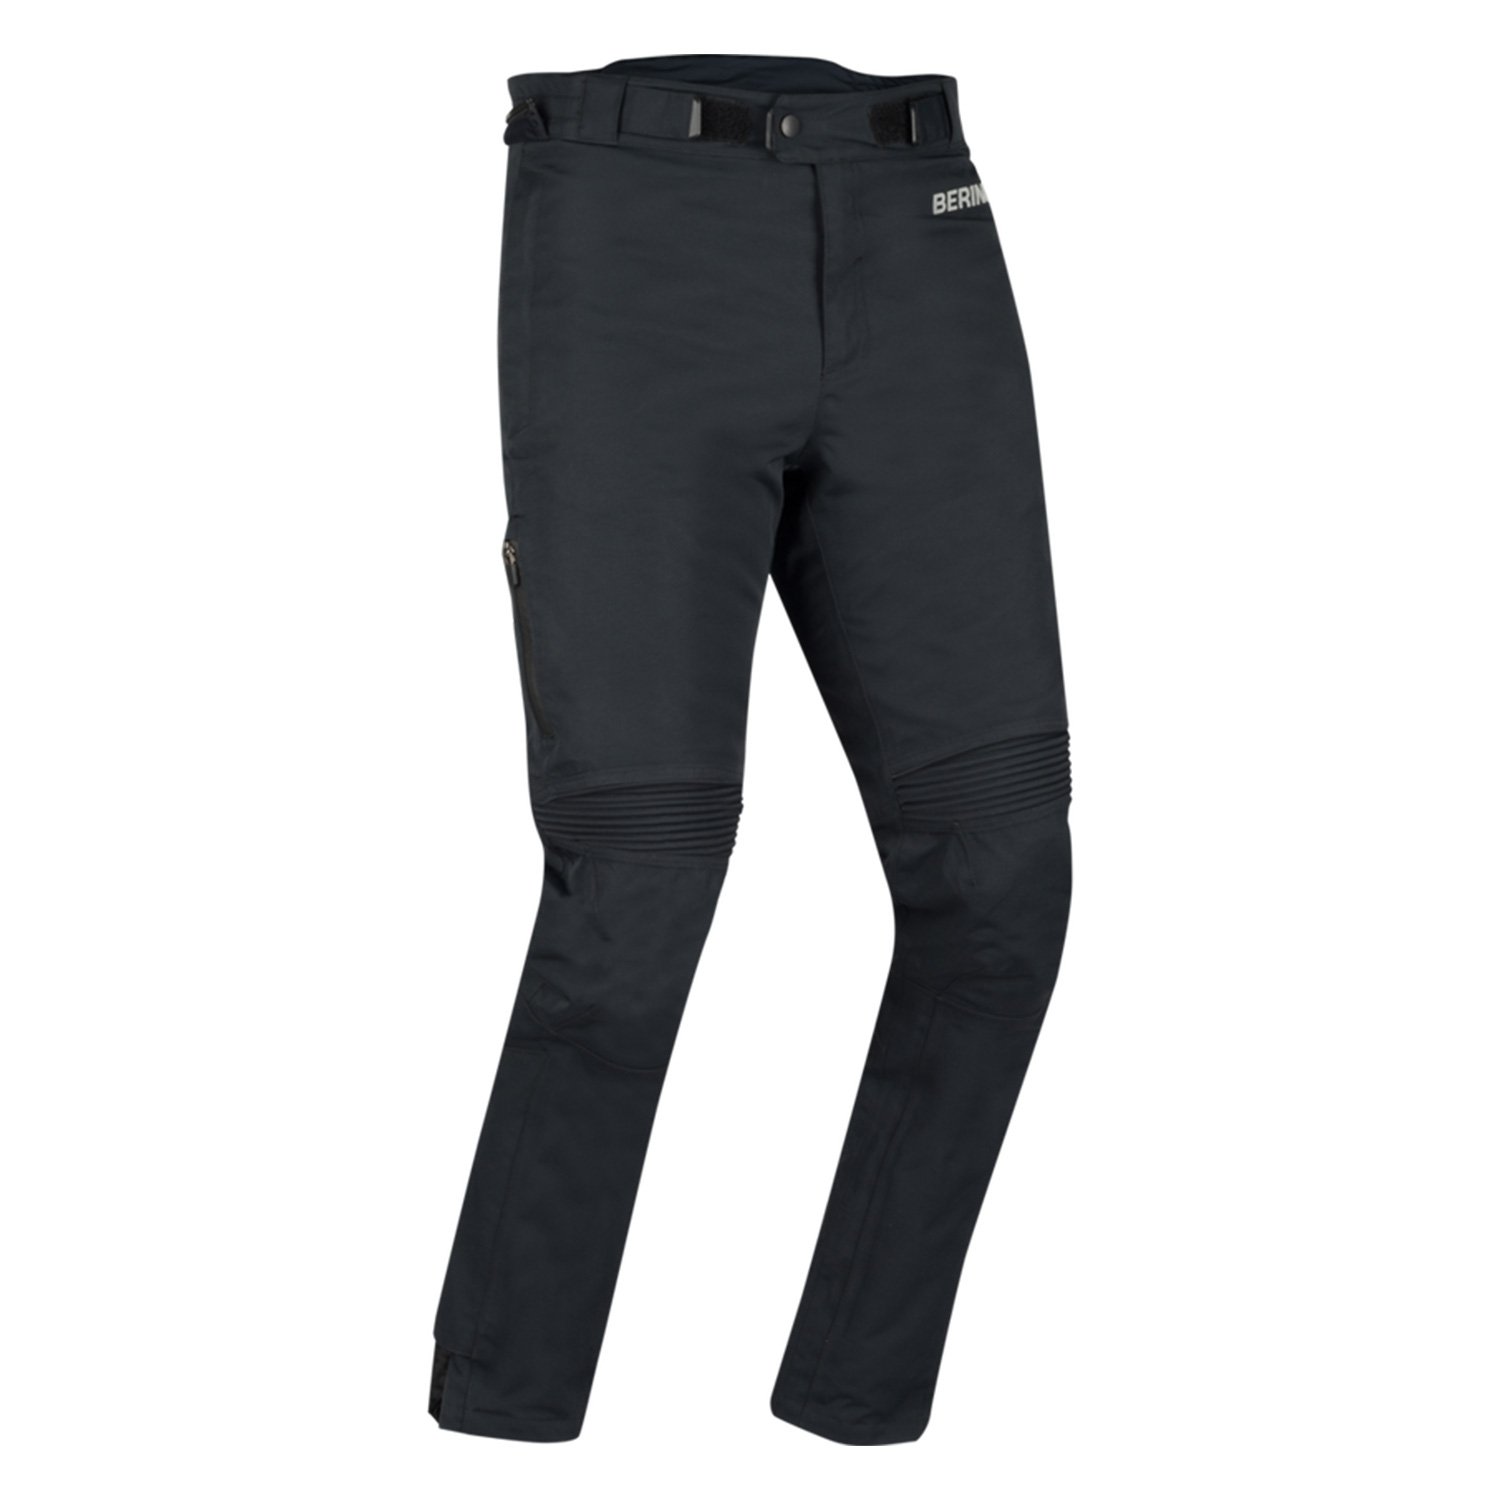 Image of EU Bering Zephyr Trousers Black Taille S